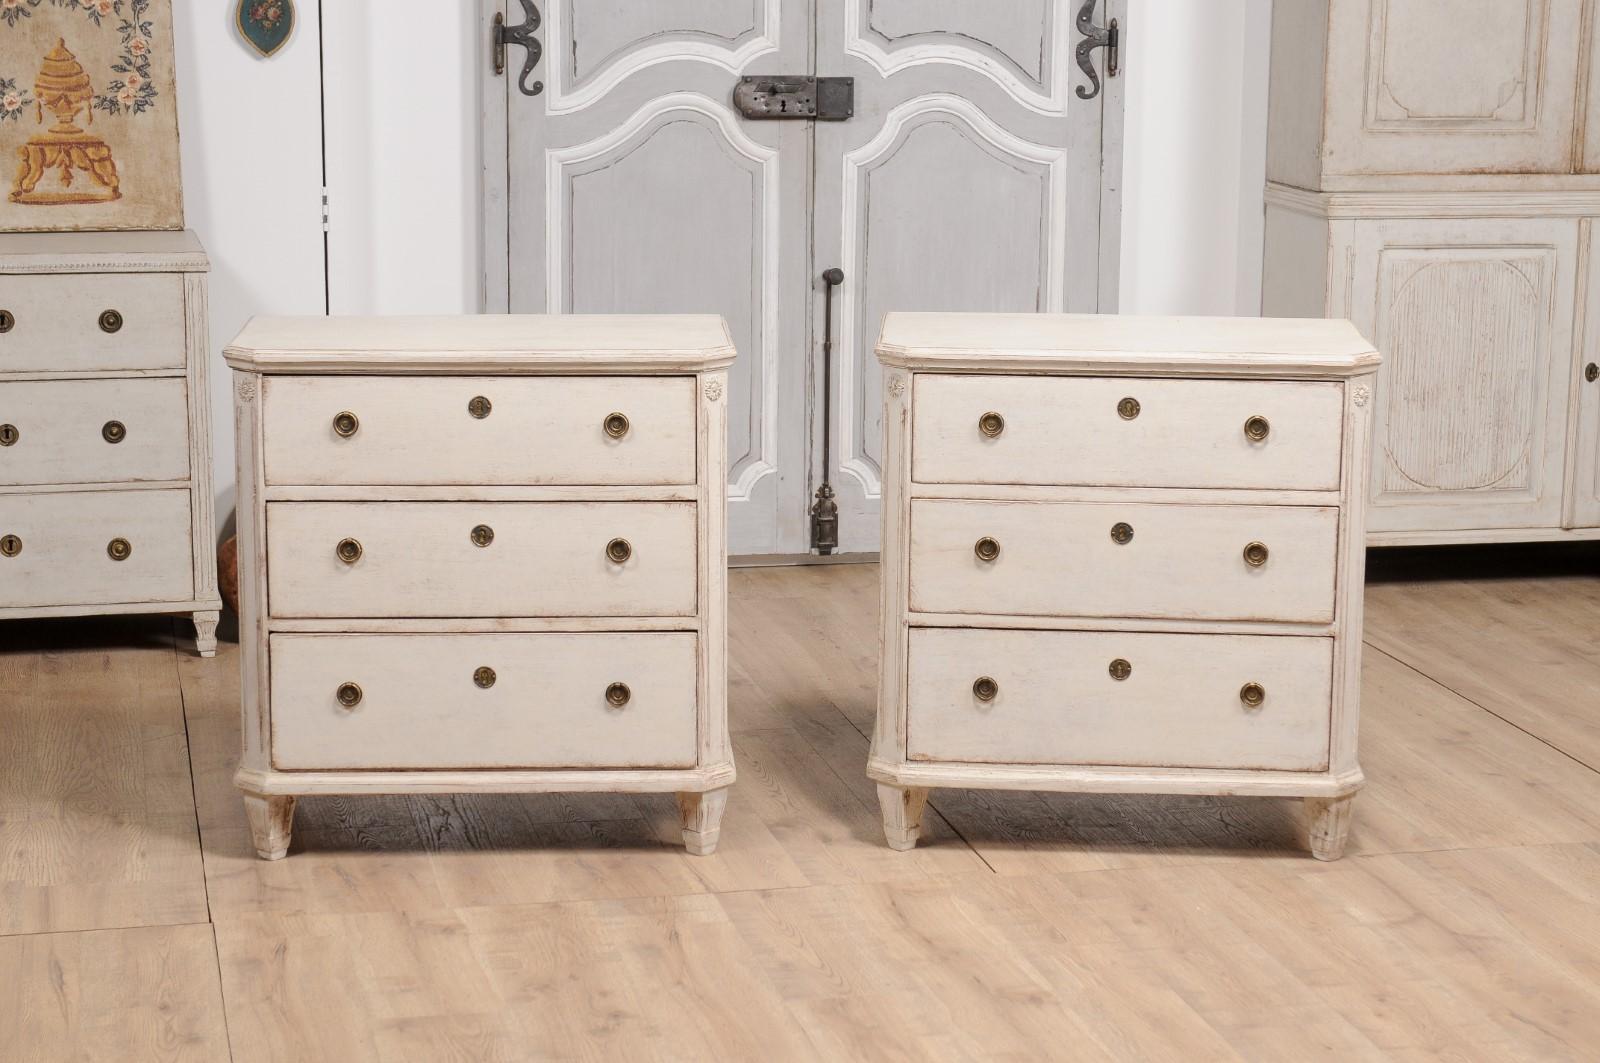 19th Century Swedish Gustavian Style Painted Three-Drawer Chests, a Pair For Sale 8